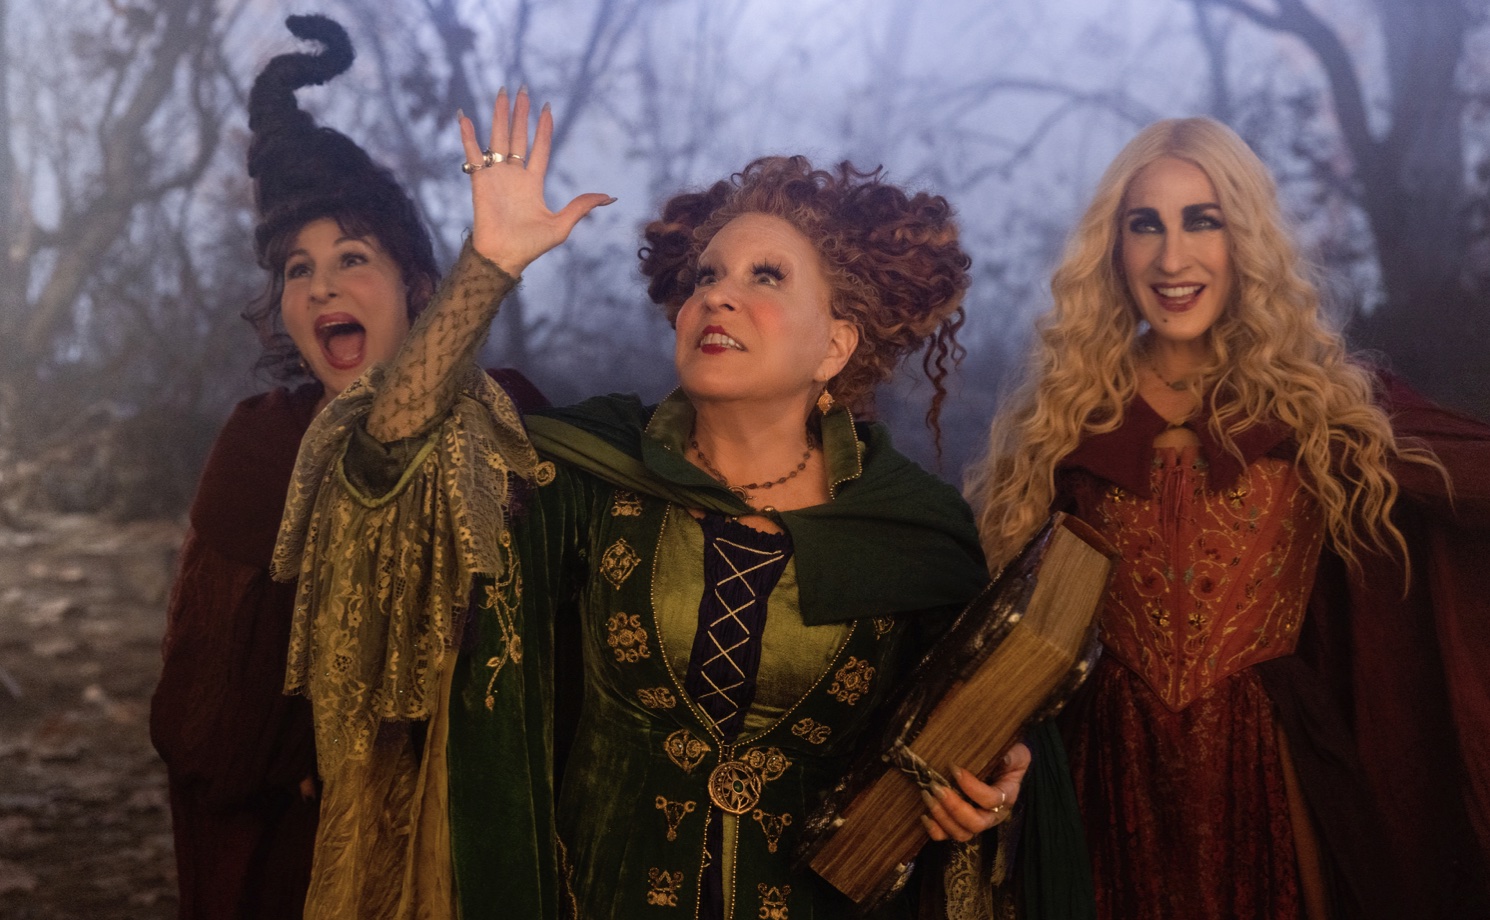 Watch: The Trailer For Hocus Pocus 2 Has Just Been Released!